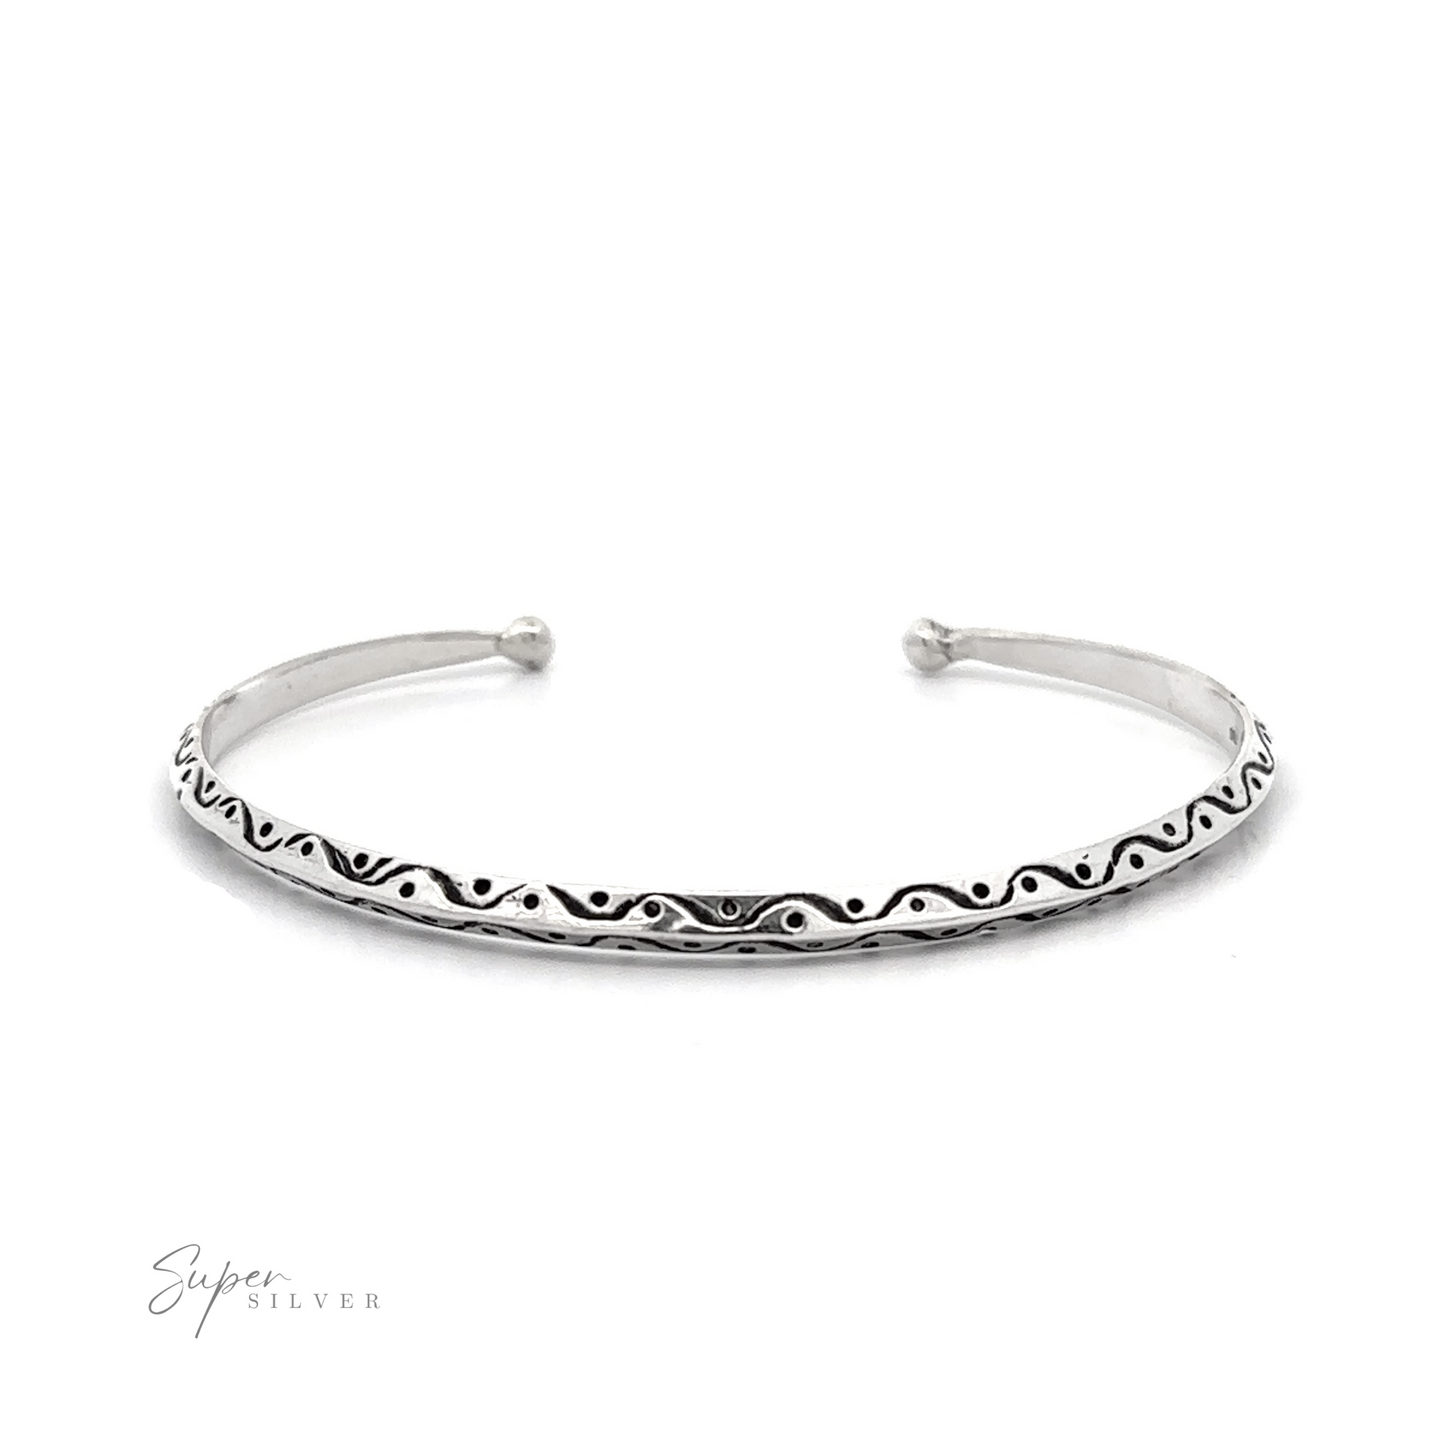 A dainty silver cuff with etching featuring a knife-edge shape.